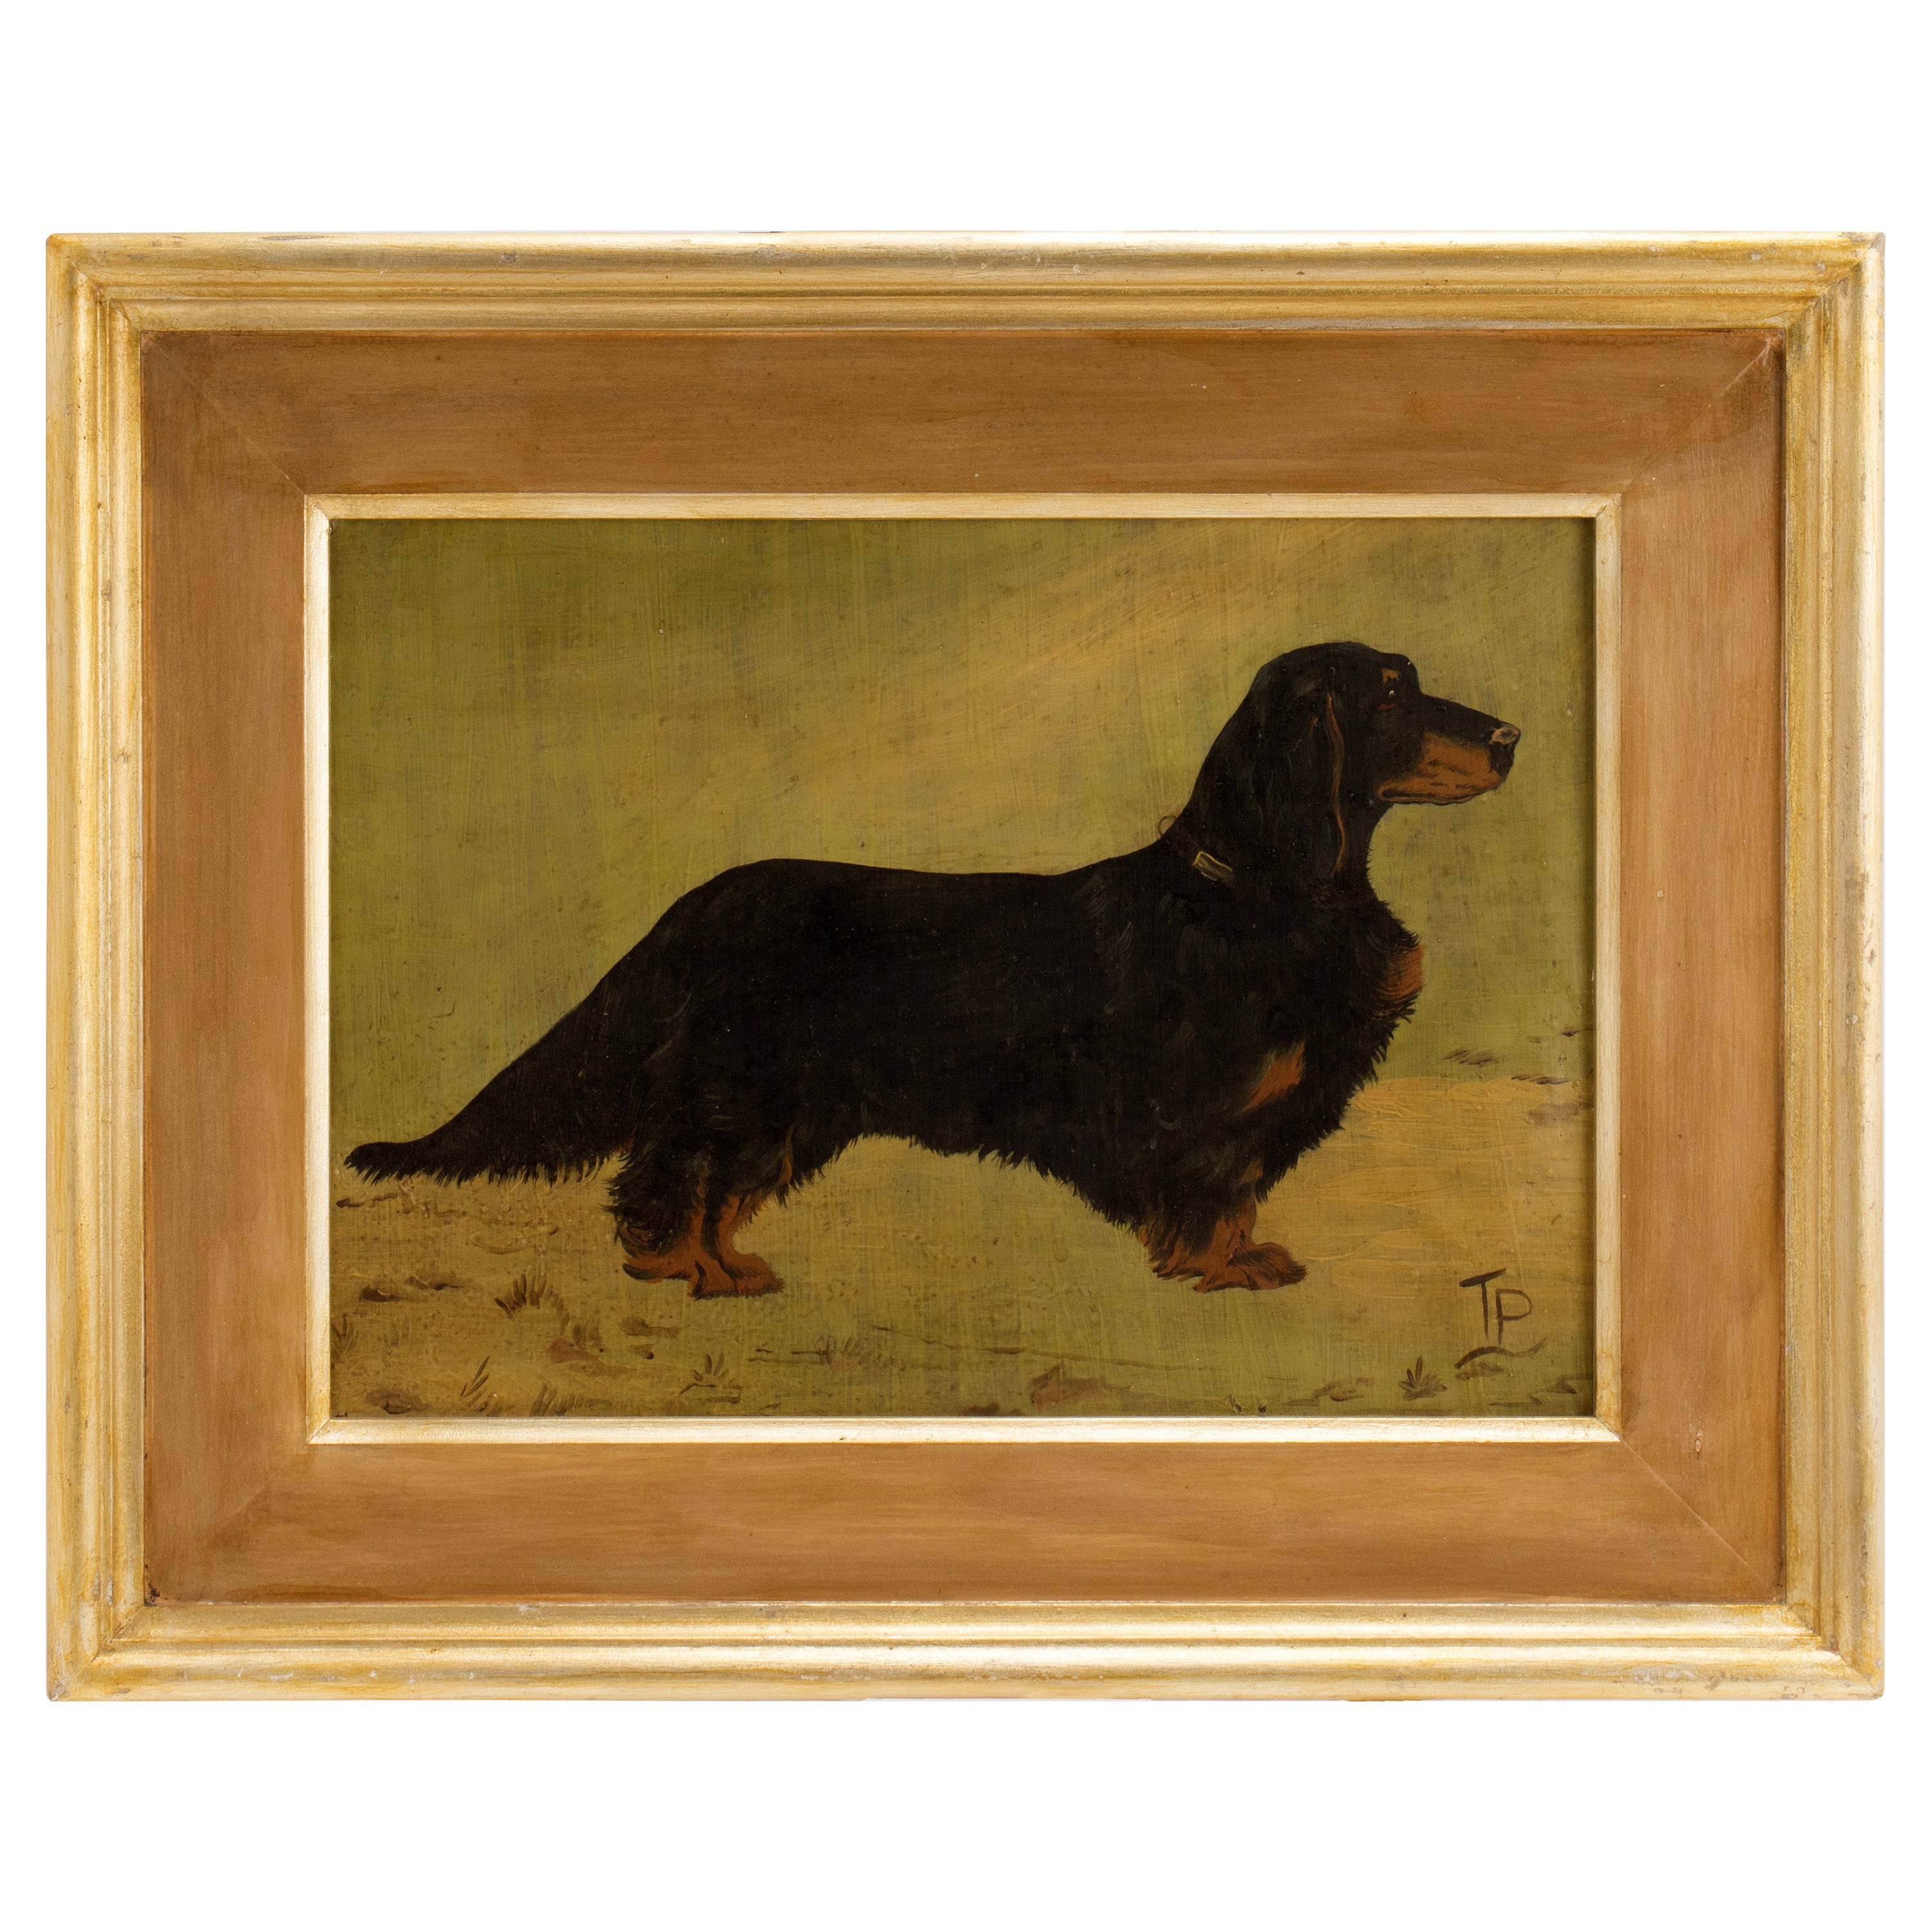 Painting Oil on Wood Depicting a Dachshund Dog, England, 1920